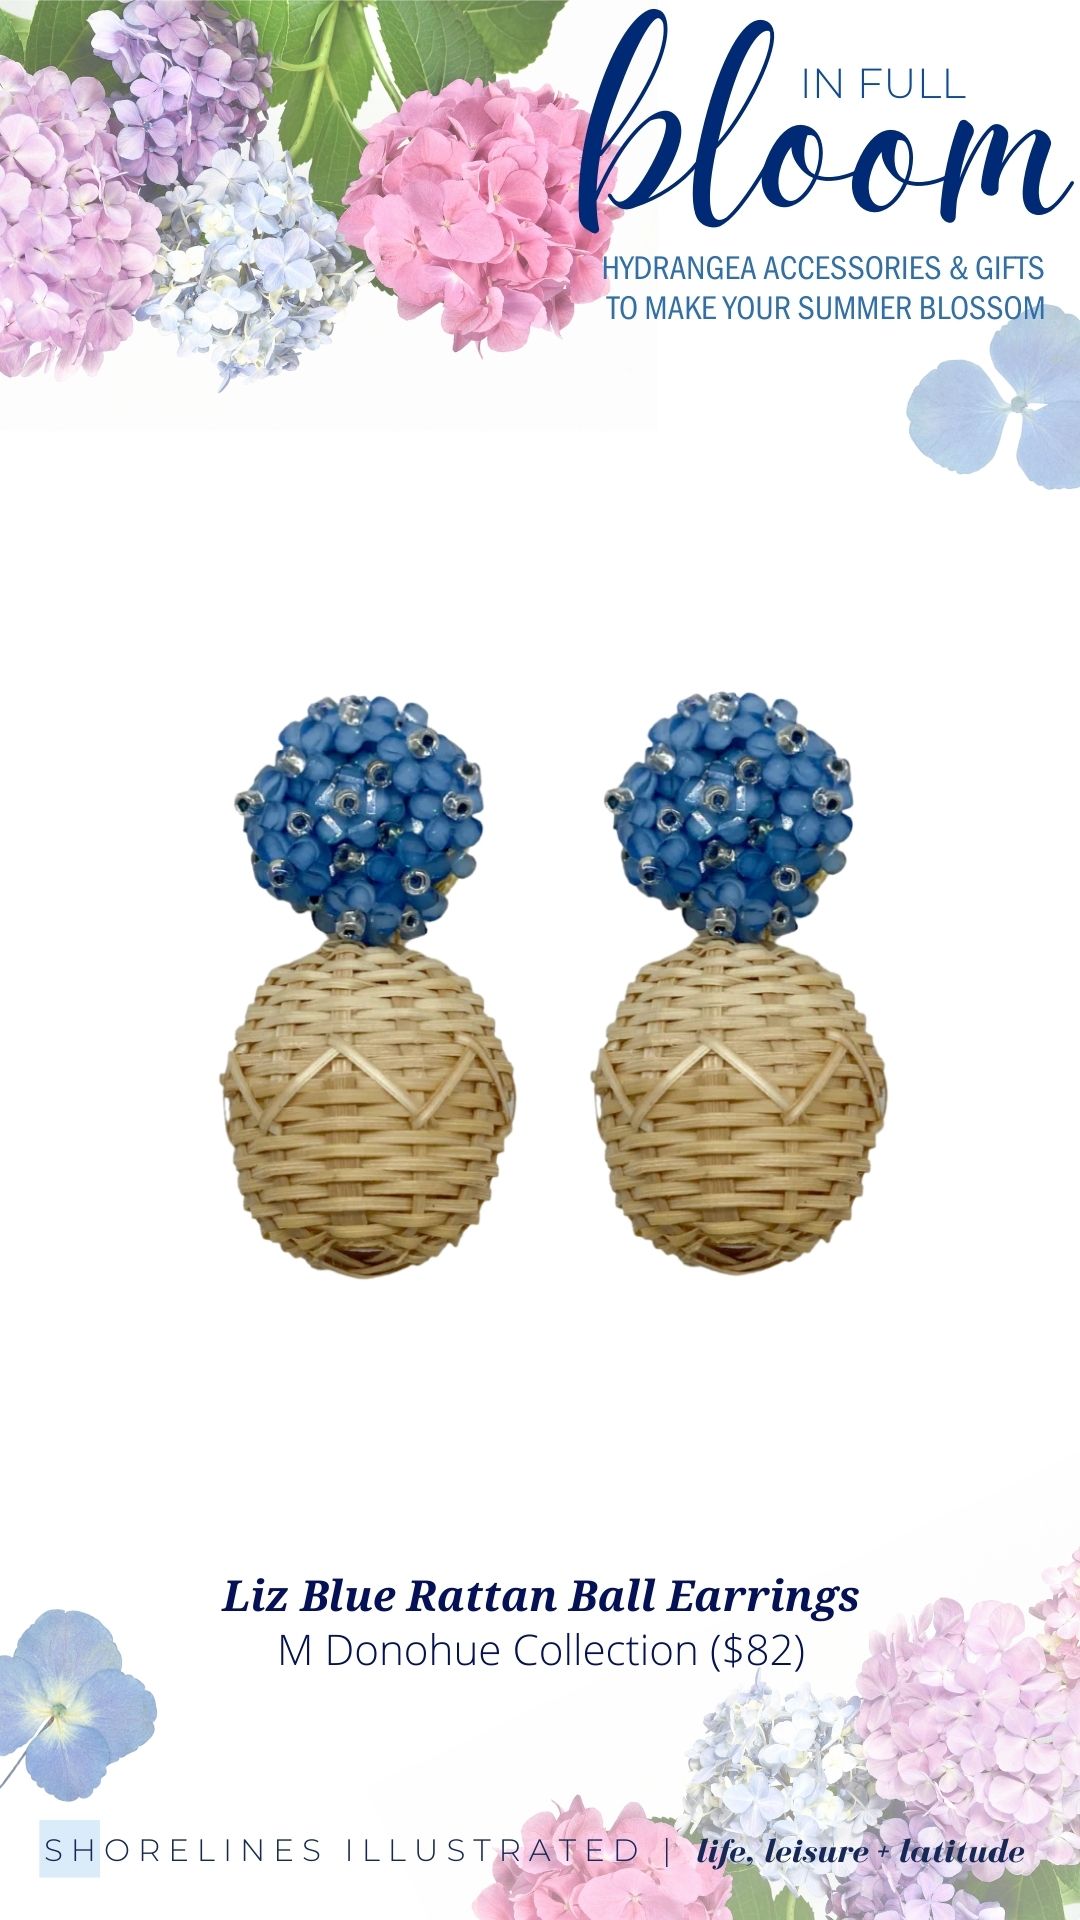 M Donohue Collection Hydrangea Basket Earrings